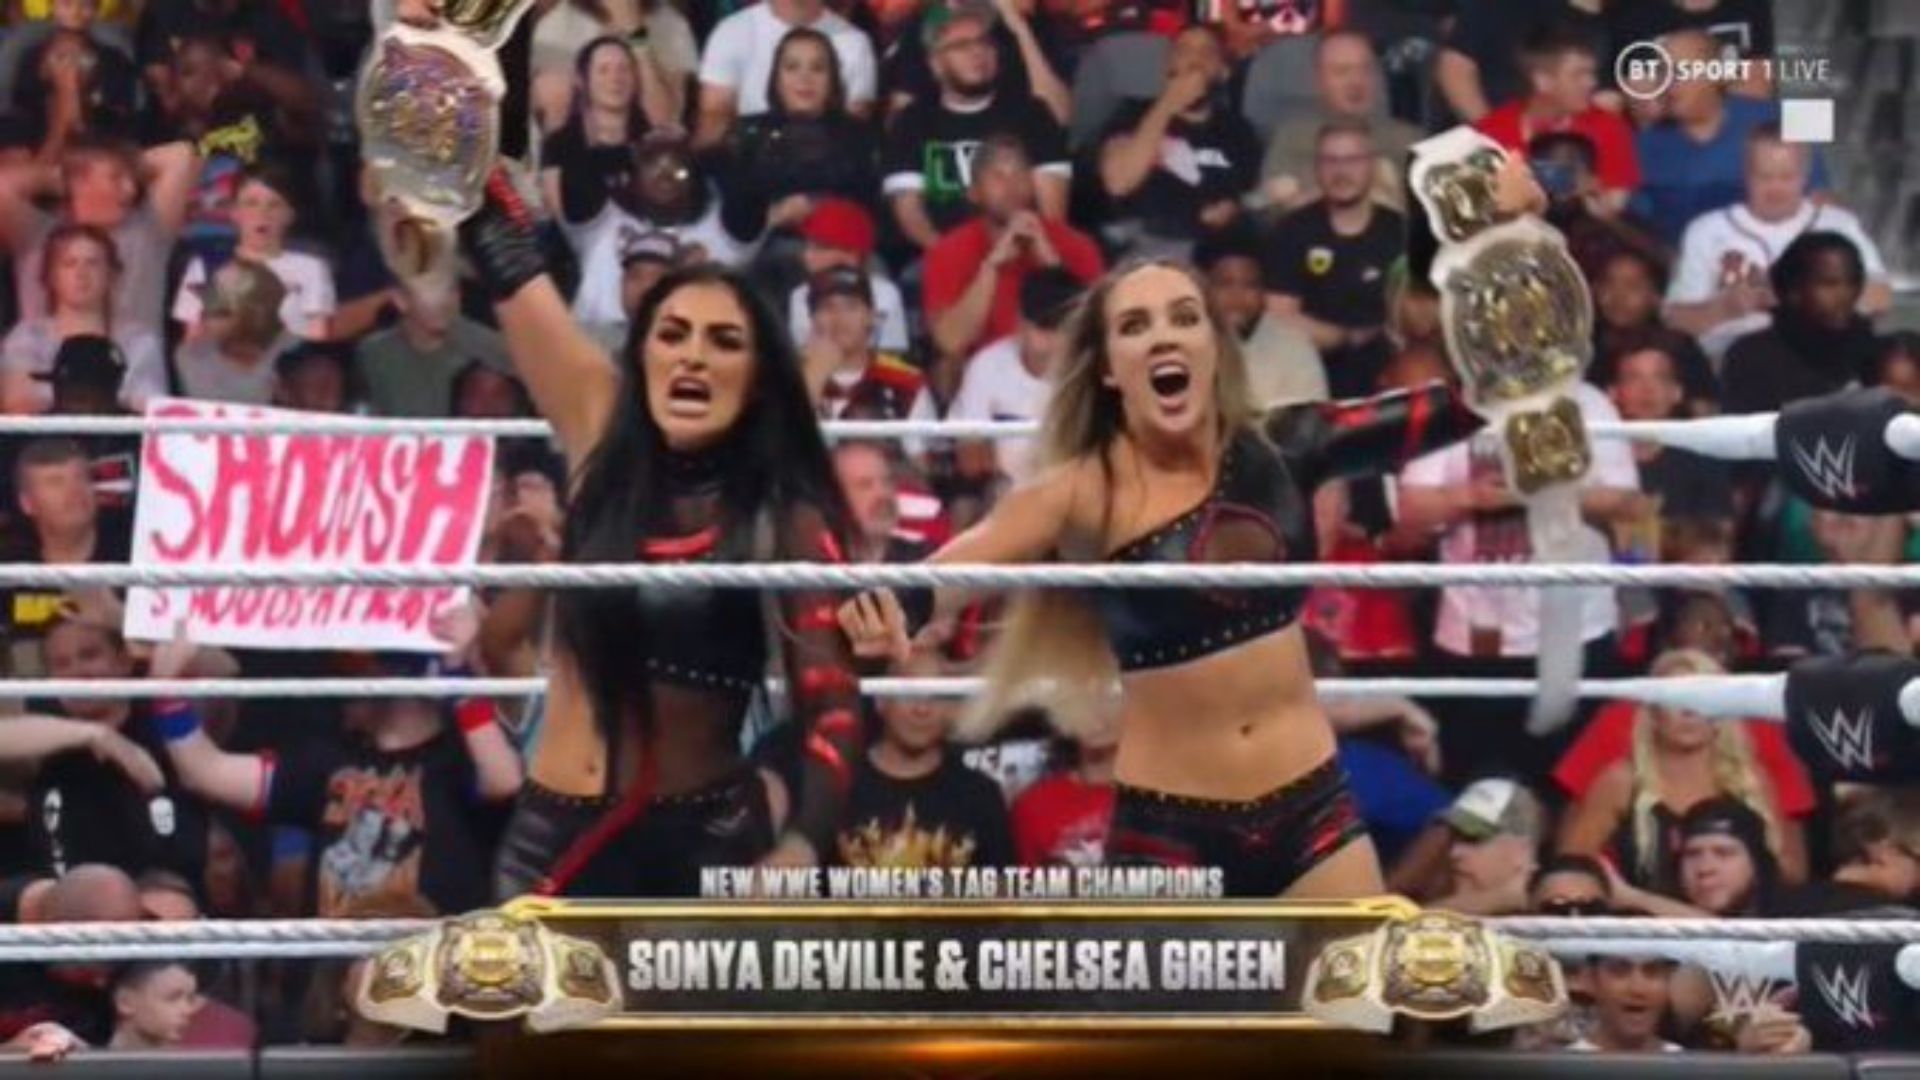 Sonya Deville got injured soon after winning the tag title with Chelsea Green